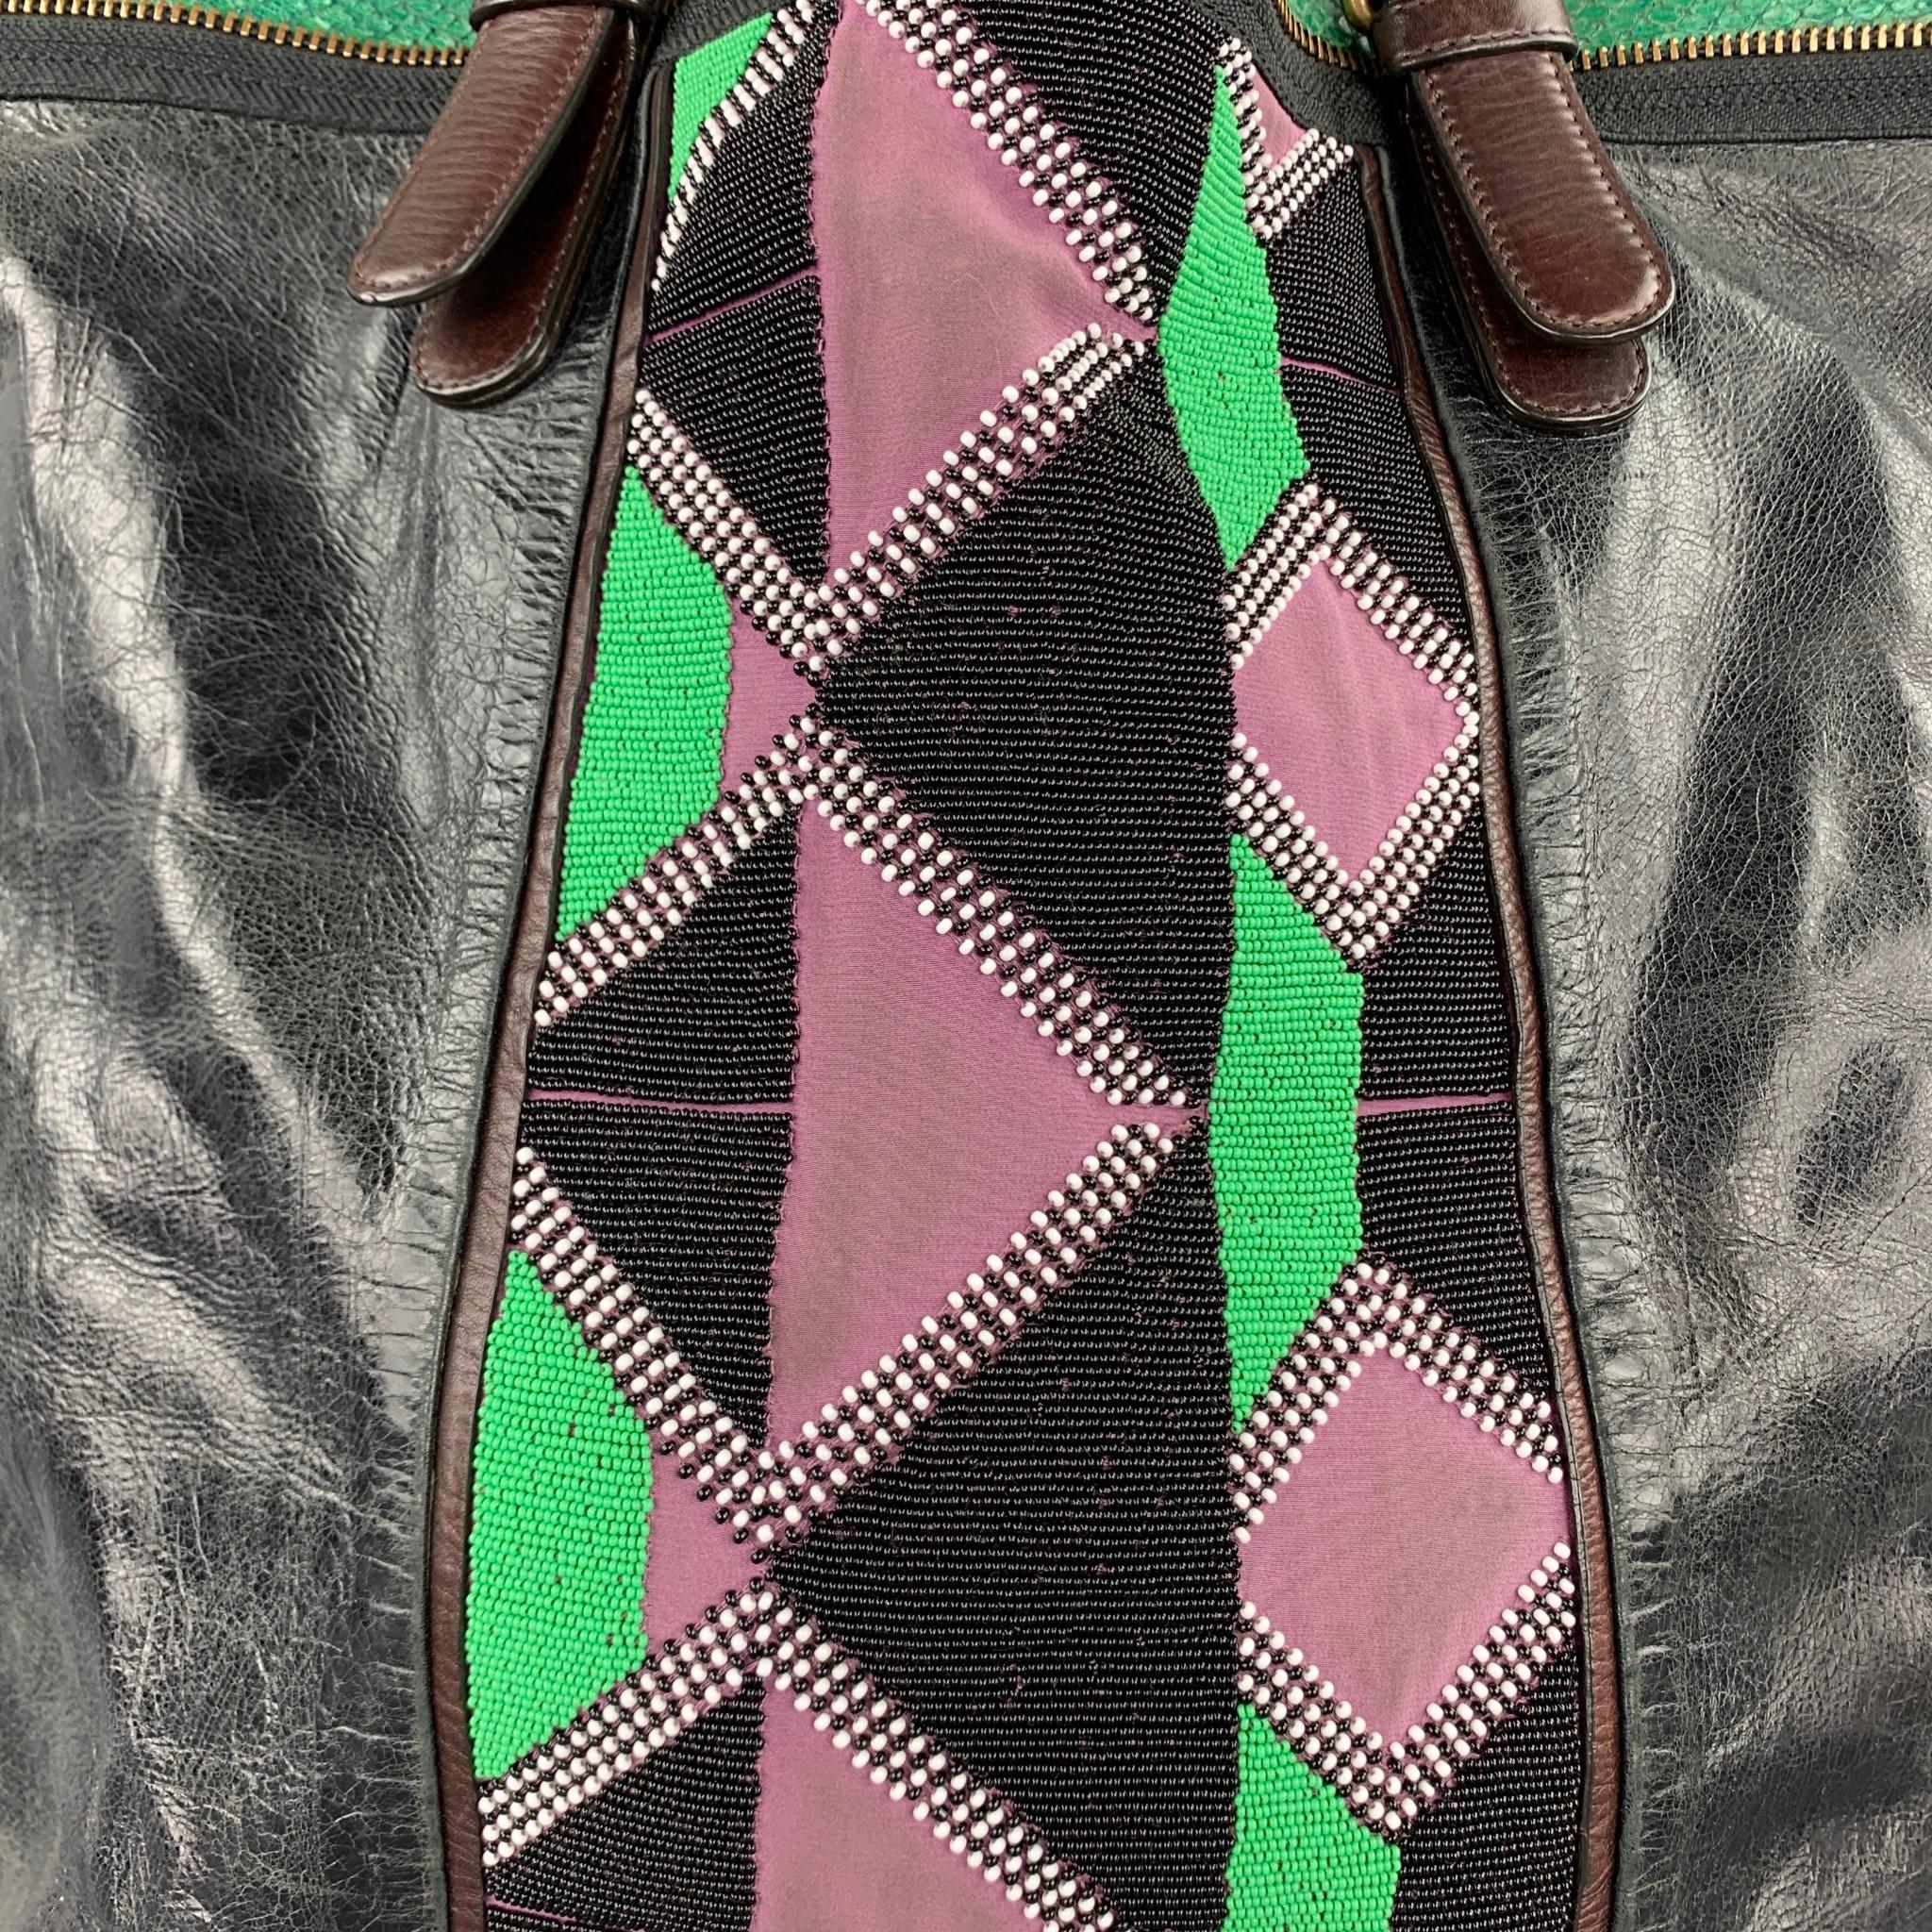 DRIES VAN NOTEN bag comes in a black leather with a green trim featuring a front beaded design, top handles, shoulder strap, double pockets, and a zipper closure.

Very Good Pre-Owned Condition.

Measurements:

Length: 14.5 in.
Width: 5.5